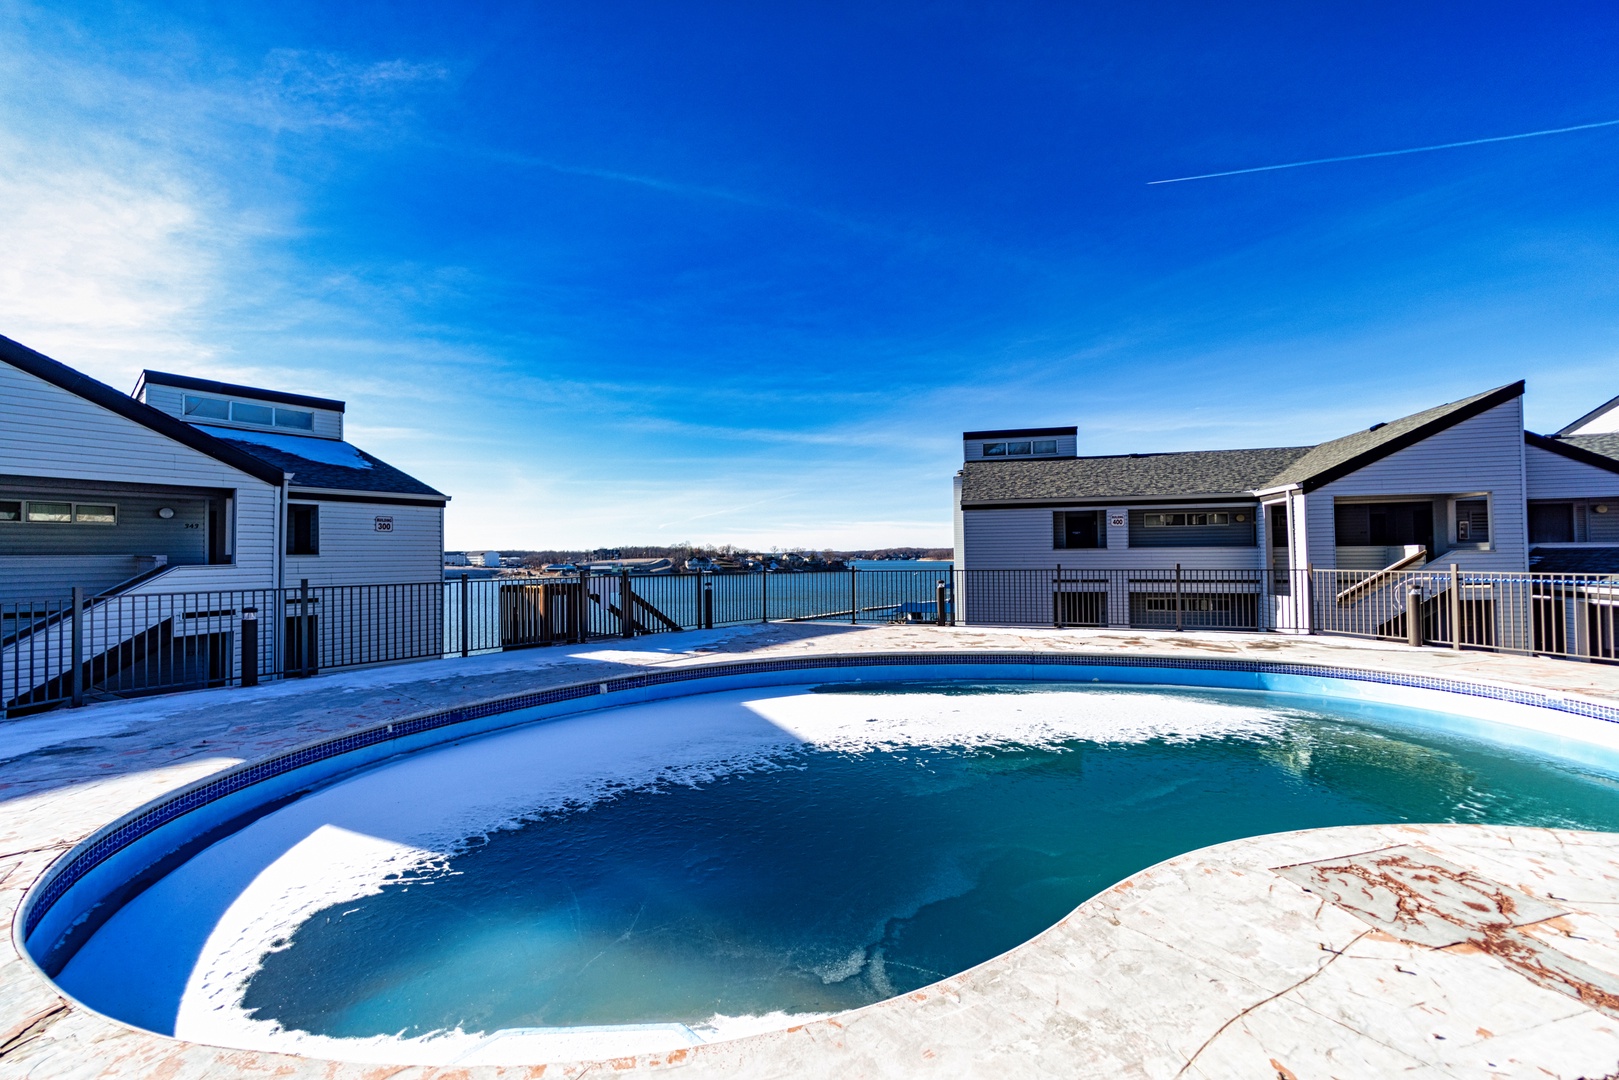 Double Feature: Take in the pool and lake view while basking in the sun